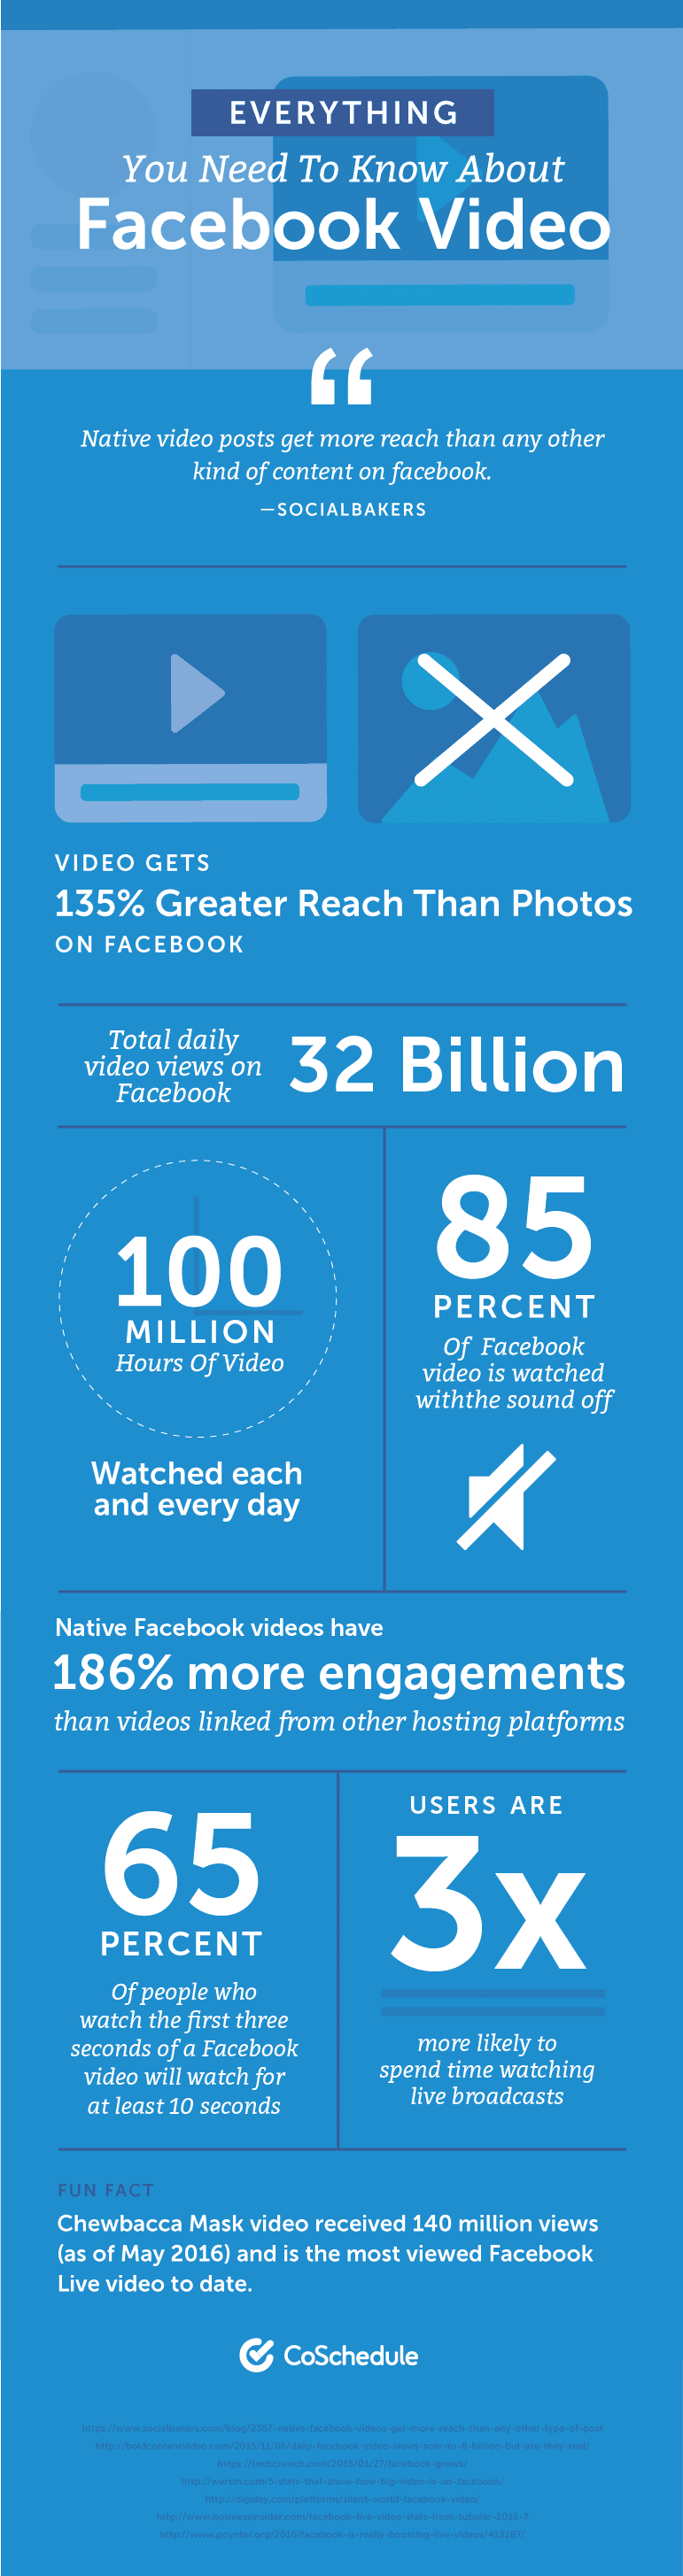 Everything You Need to Know About Facebook Video